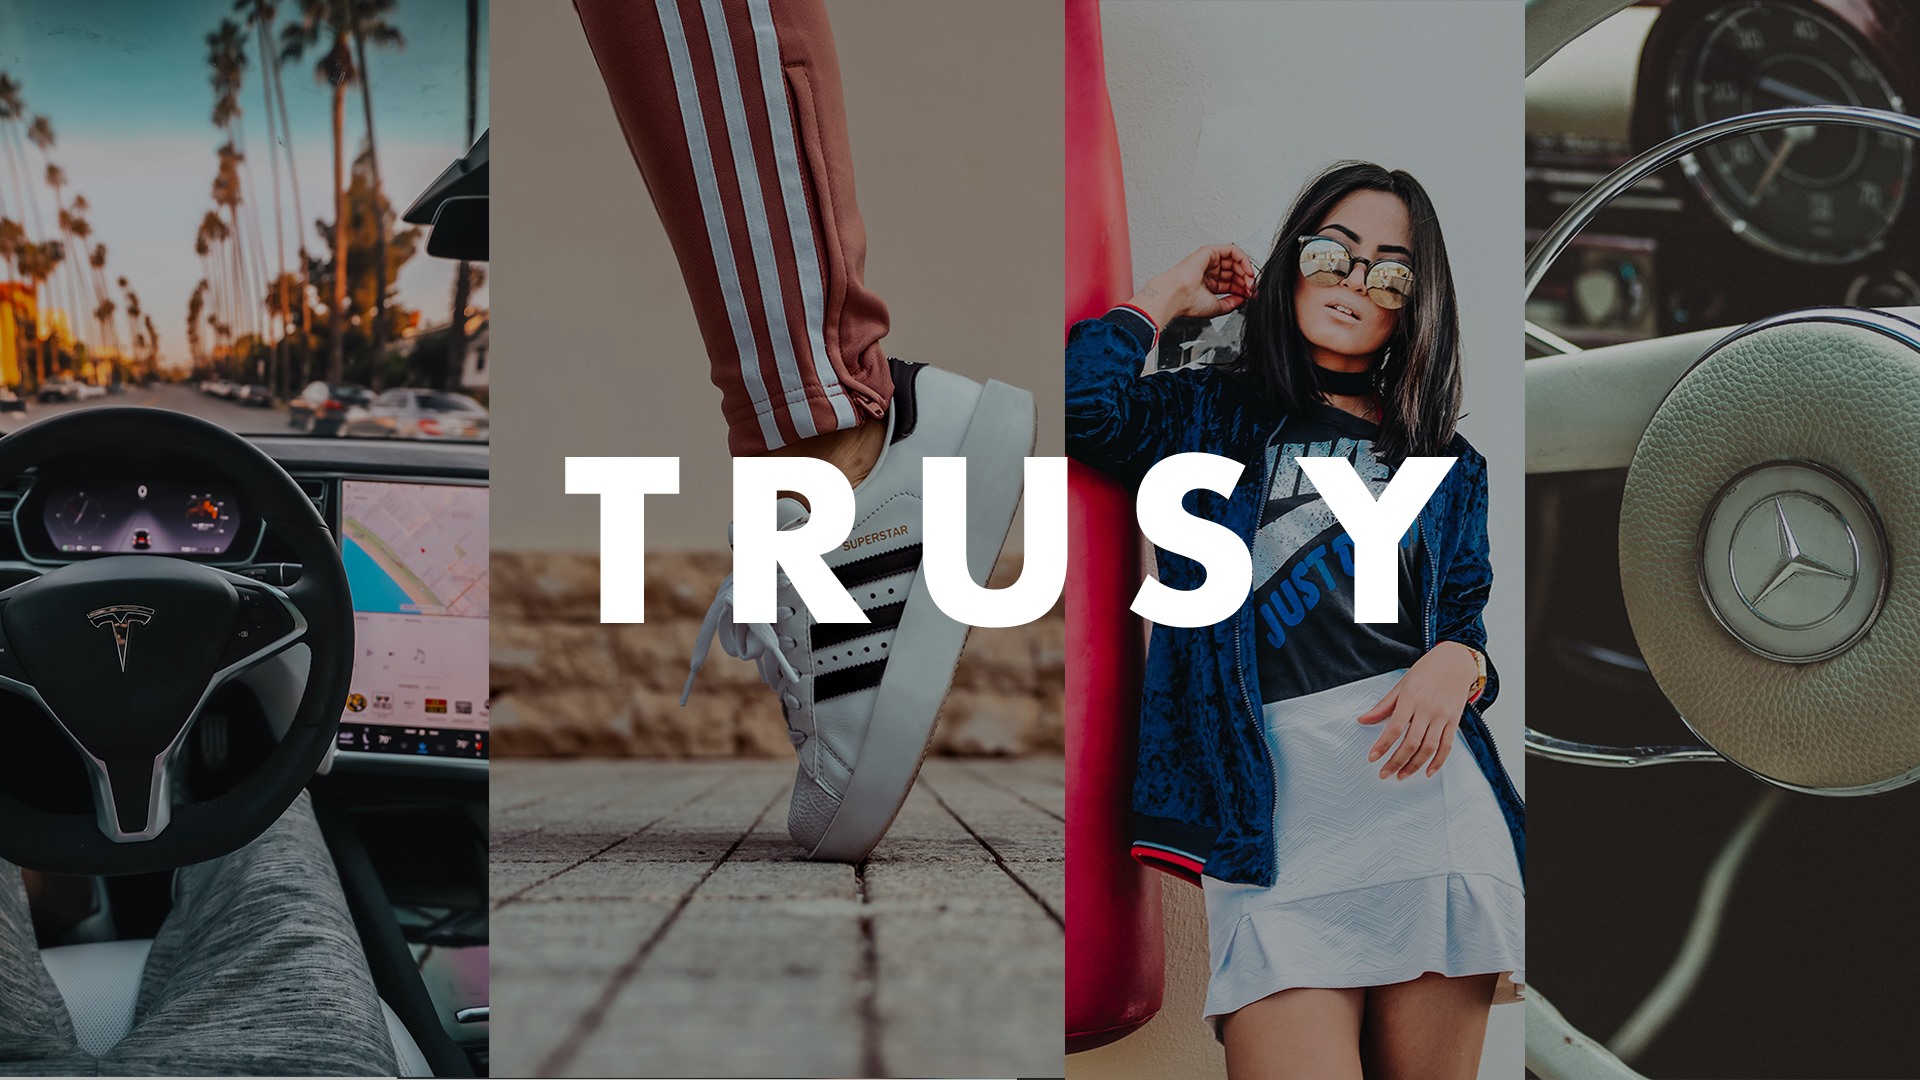 Trusy Social - The Company Behind the World’s Largest Instagram Accounts